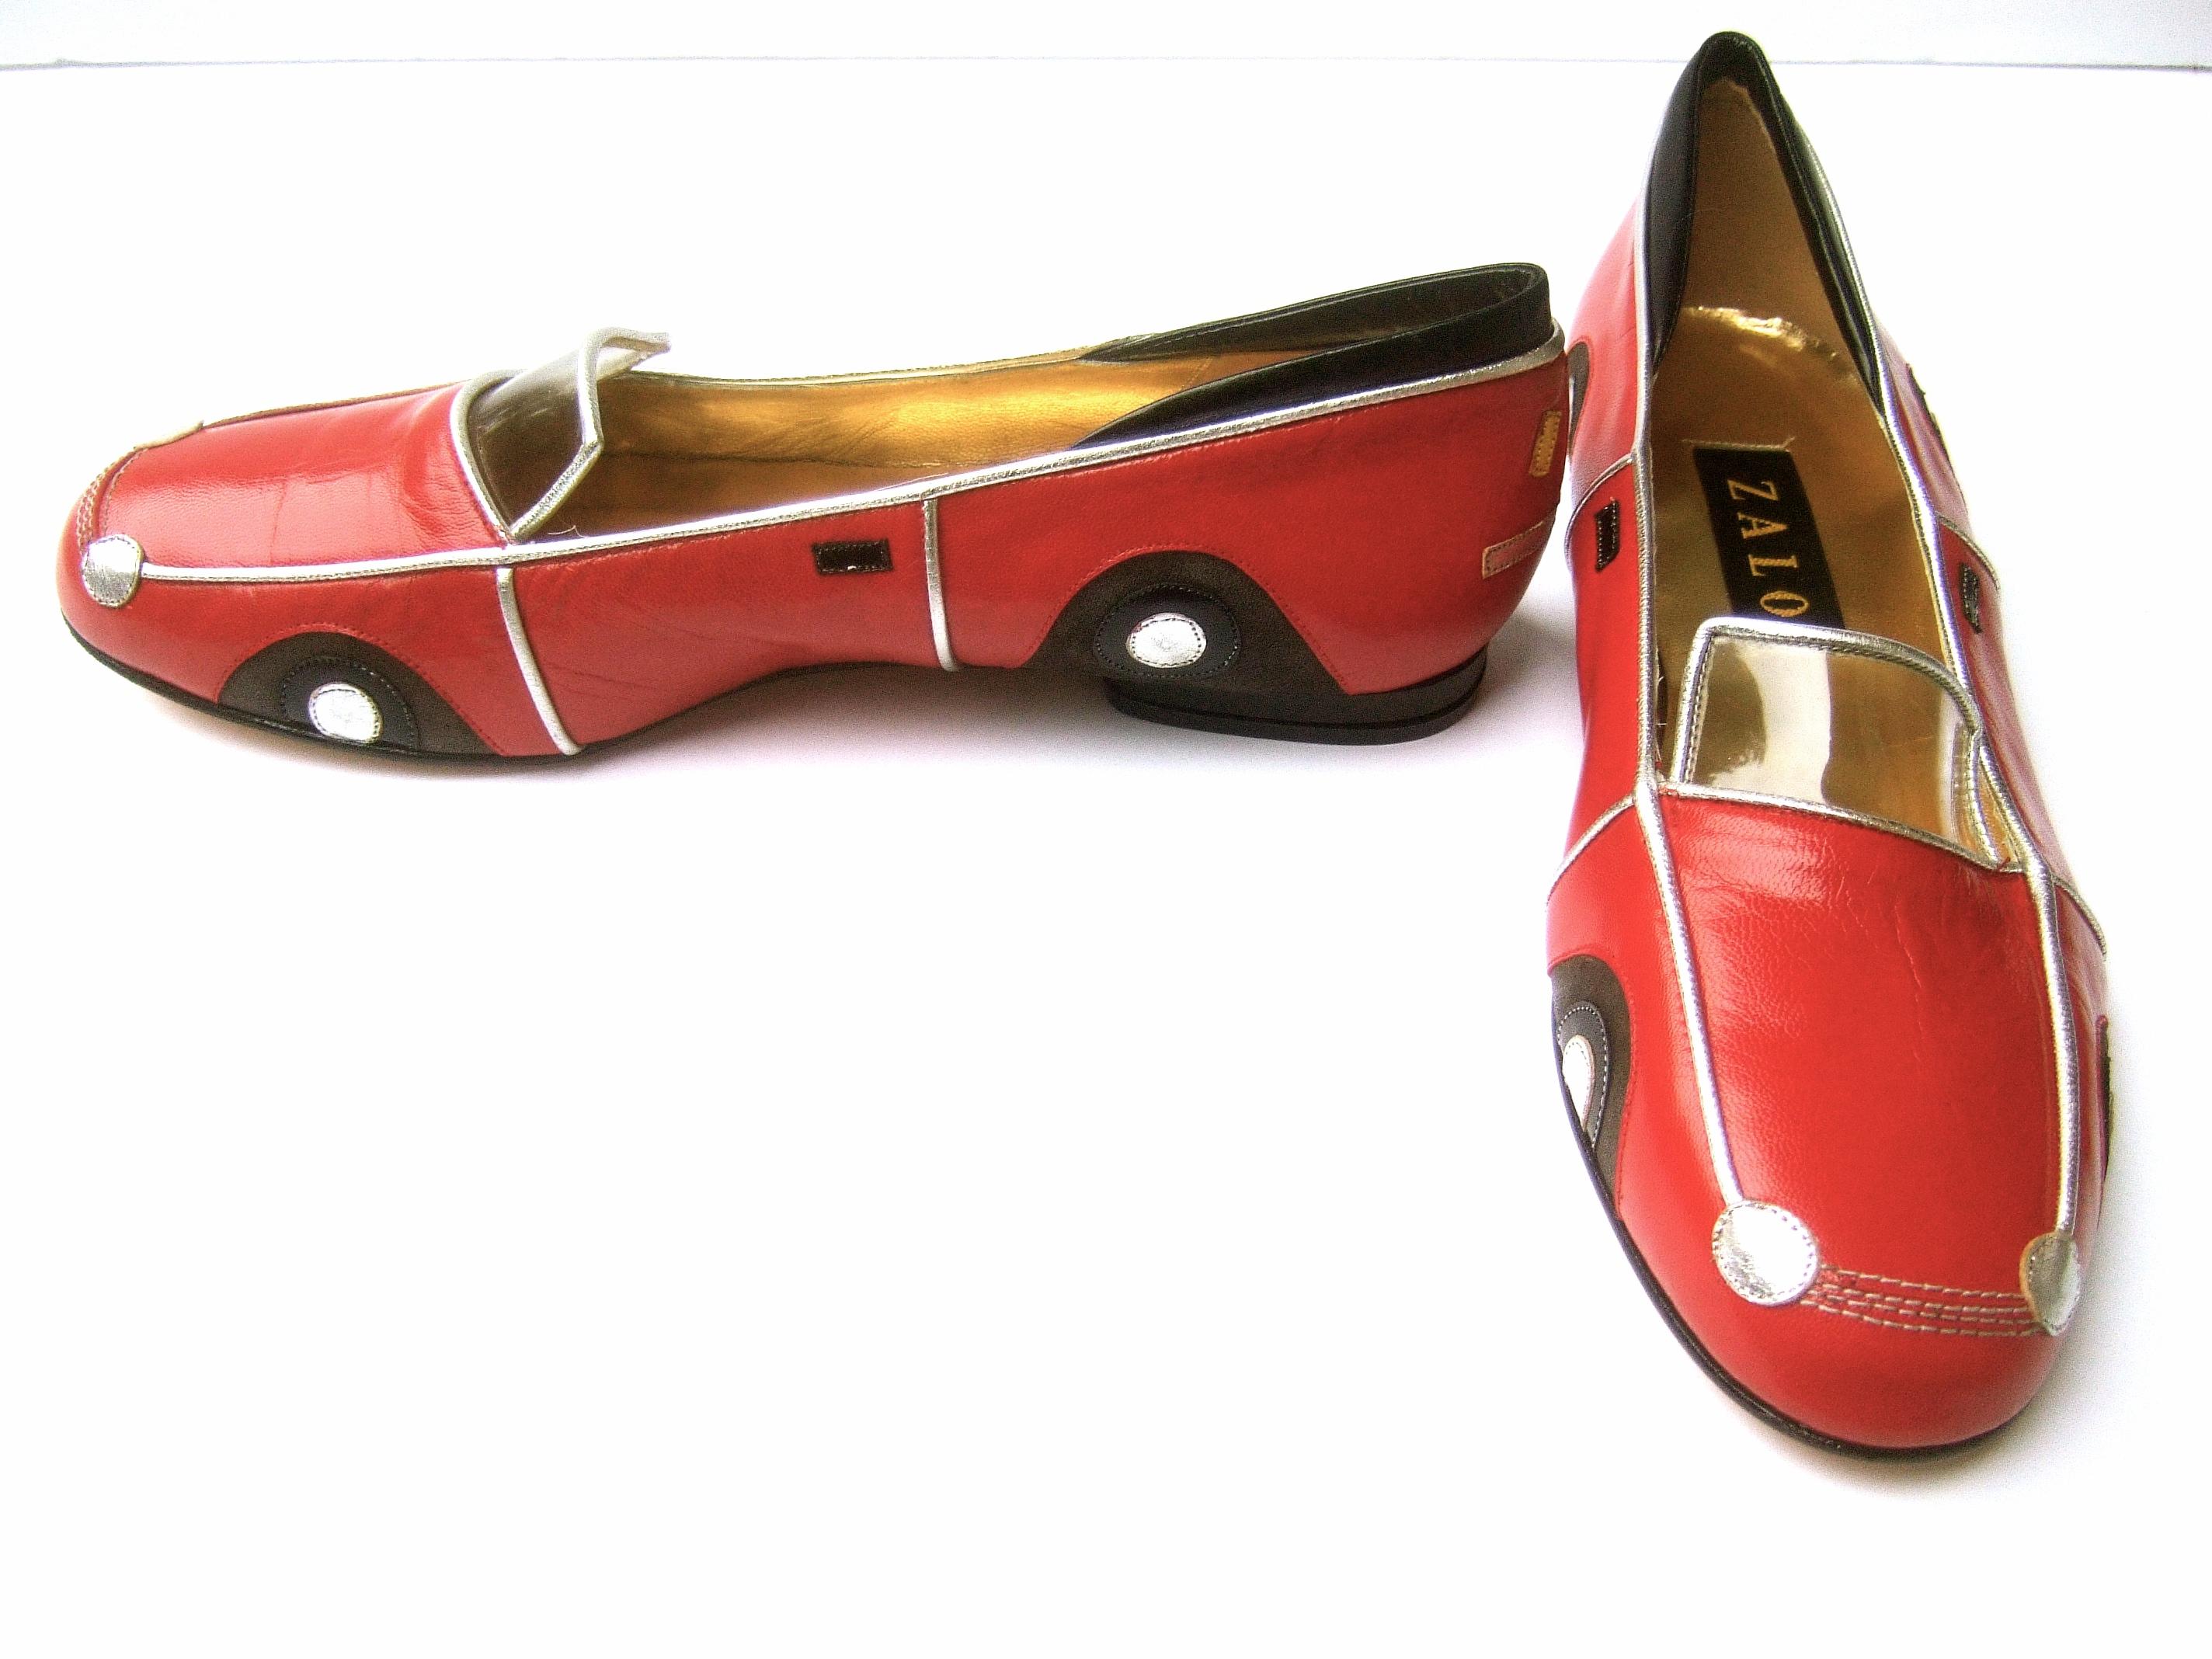 Whimsical Red Leather Sports Car Design Shoes by Zalo US Size 9 M c 1990 8